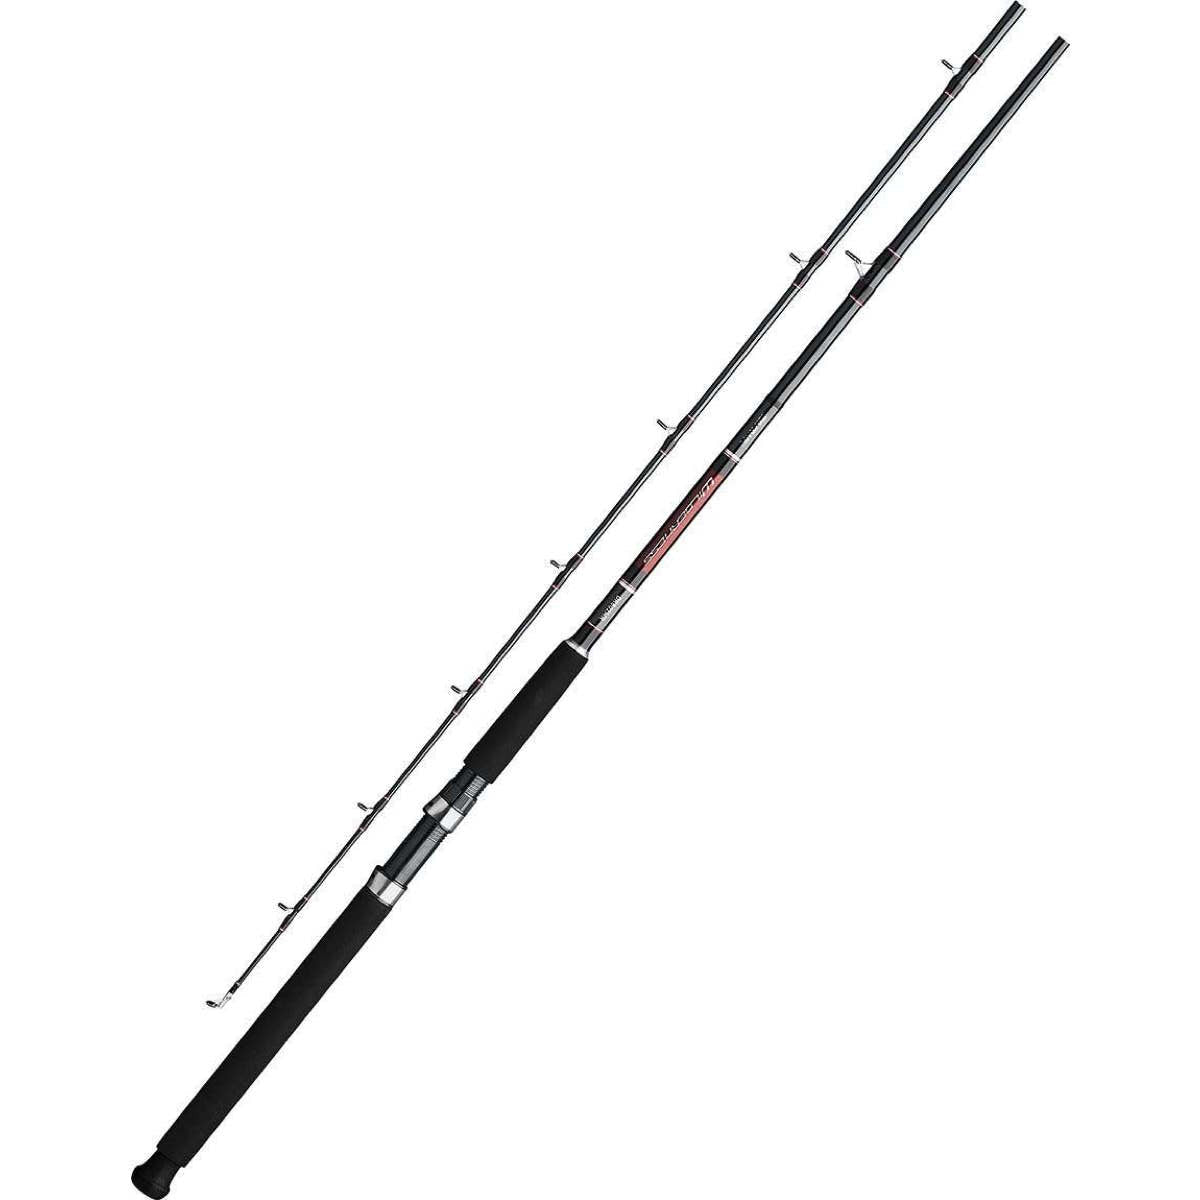 Photo of Daiwa Wilderness Downrigger Trolling Rod for sale at United Tackle Shops.